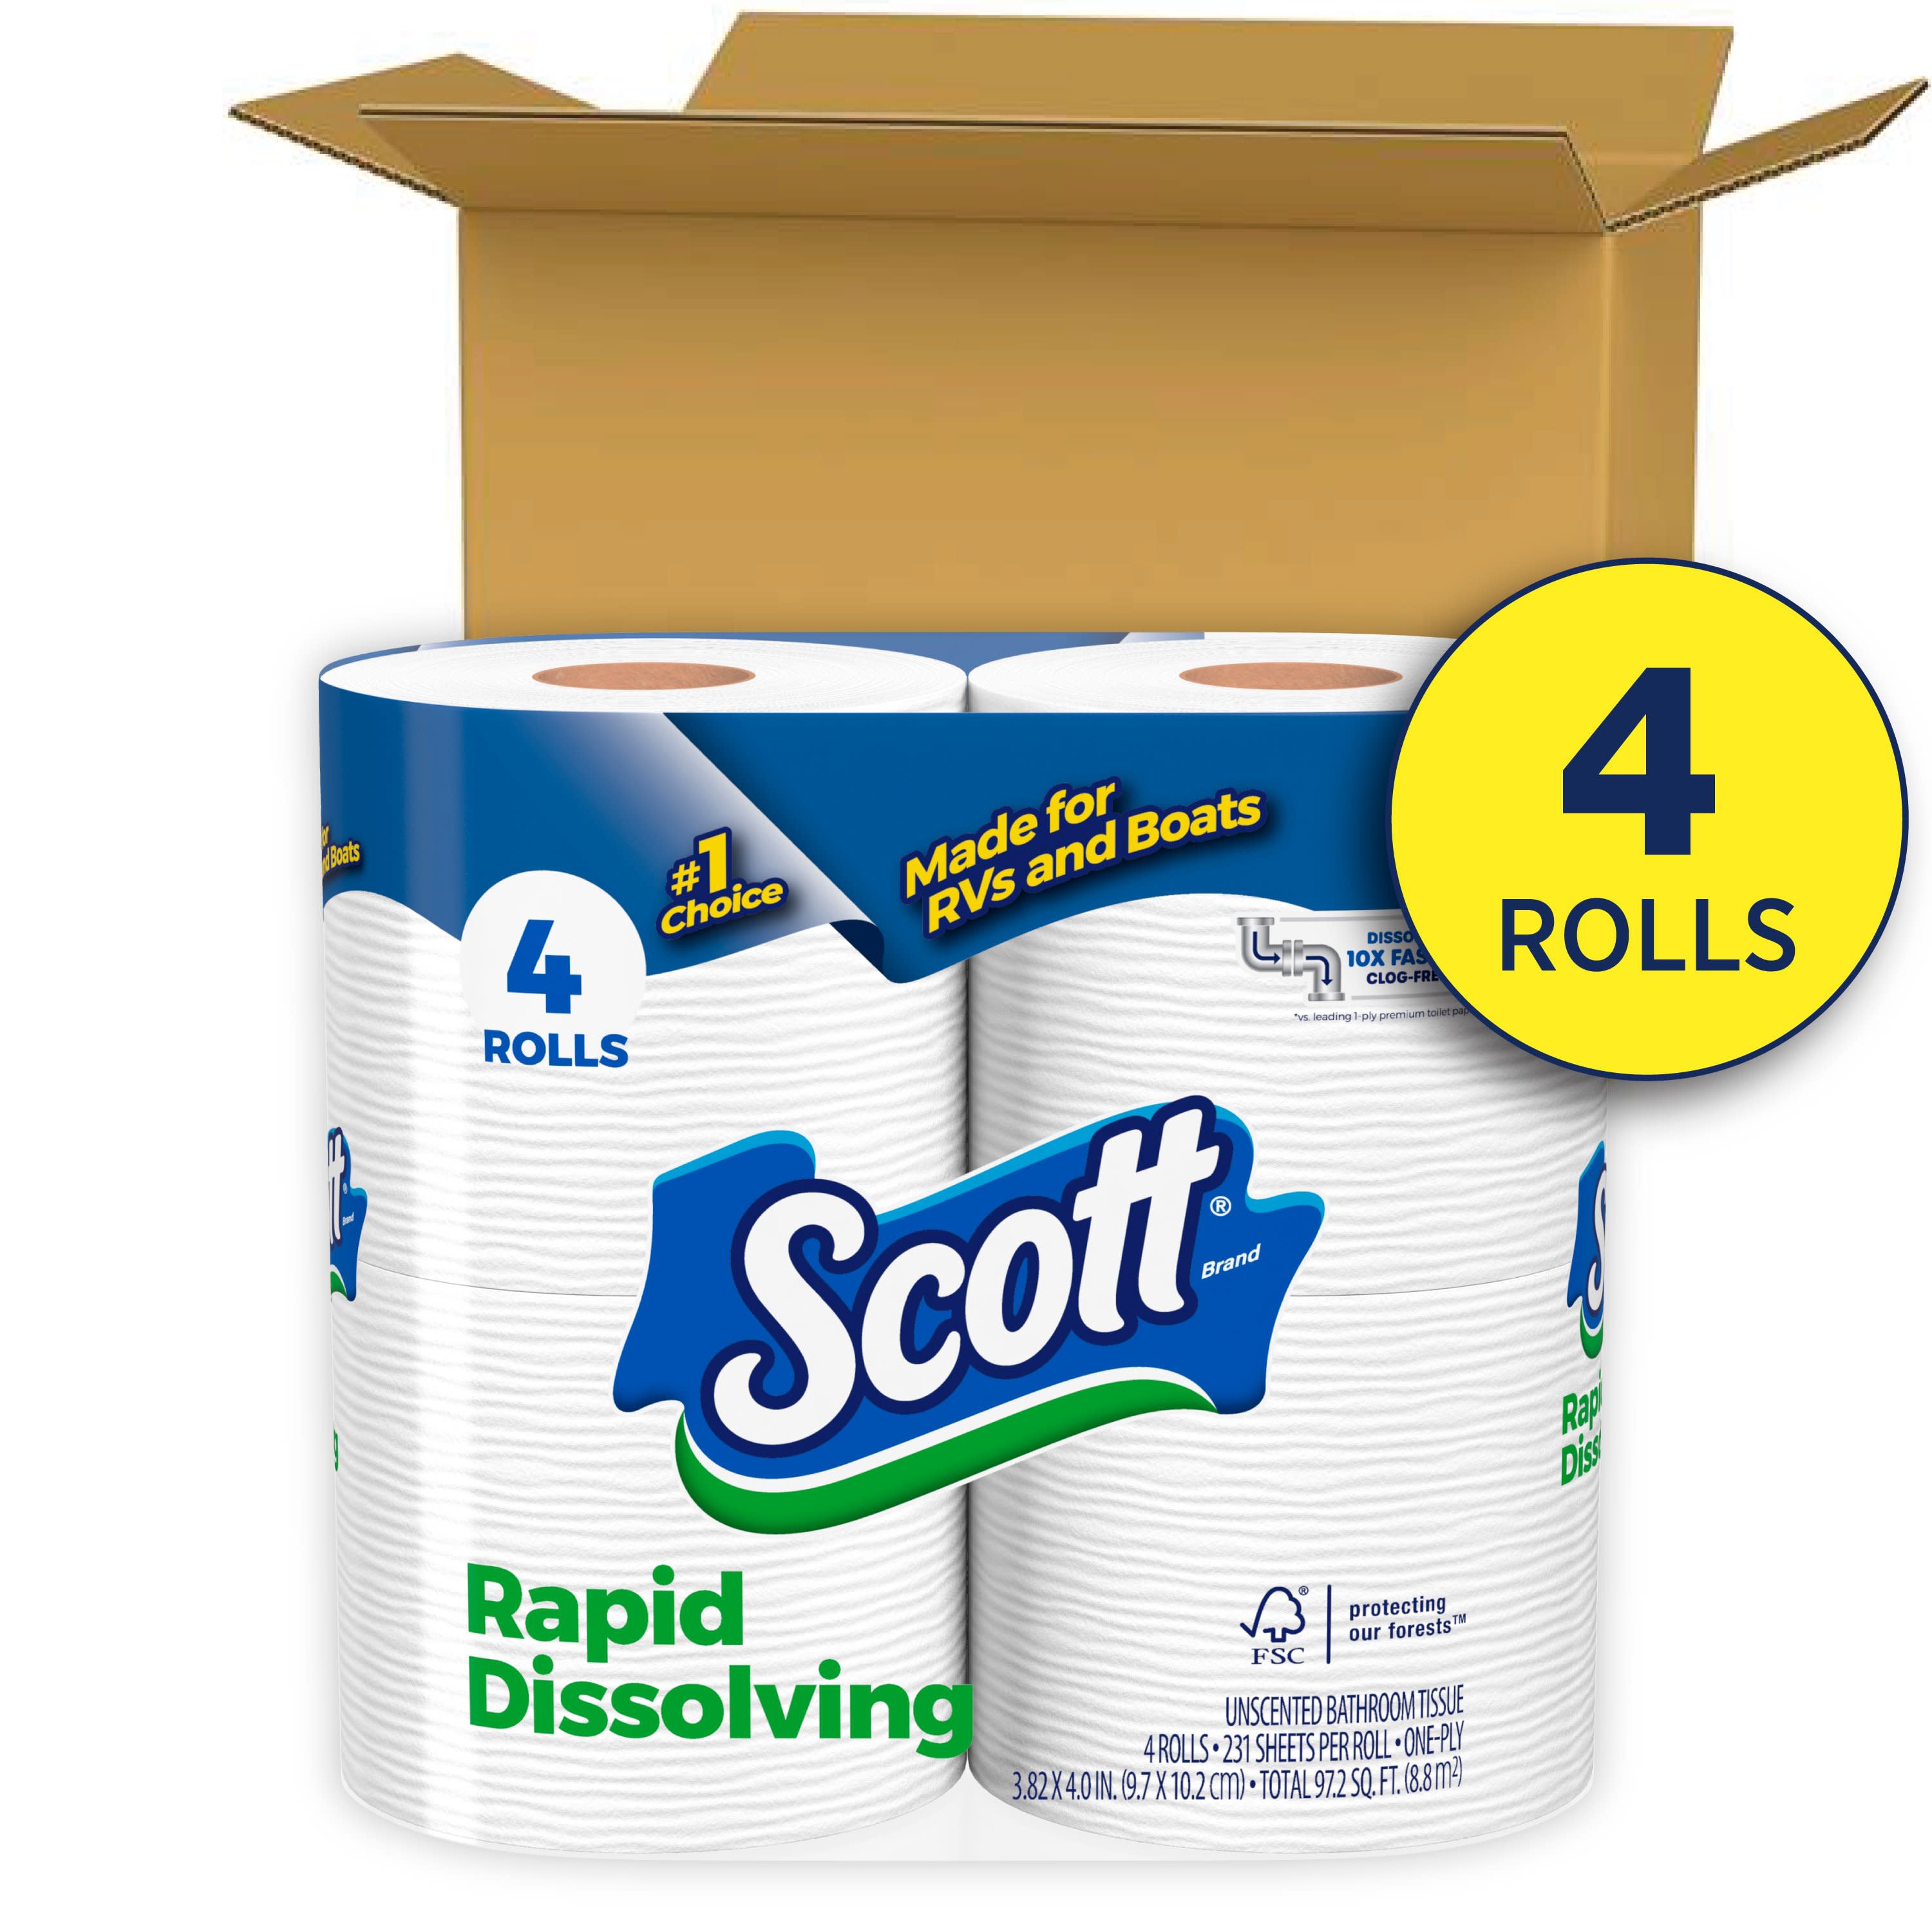 Scott Rapid-Dissolving Toilet Paper for RVs & Boats, 4 Double Rolls - image 3 of 11